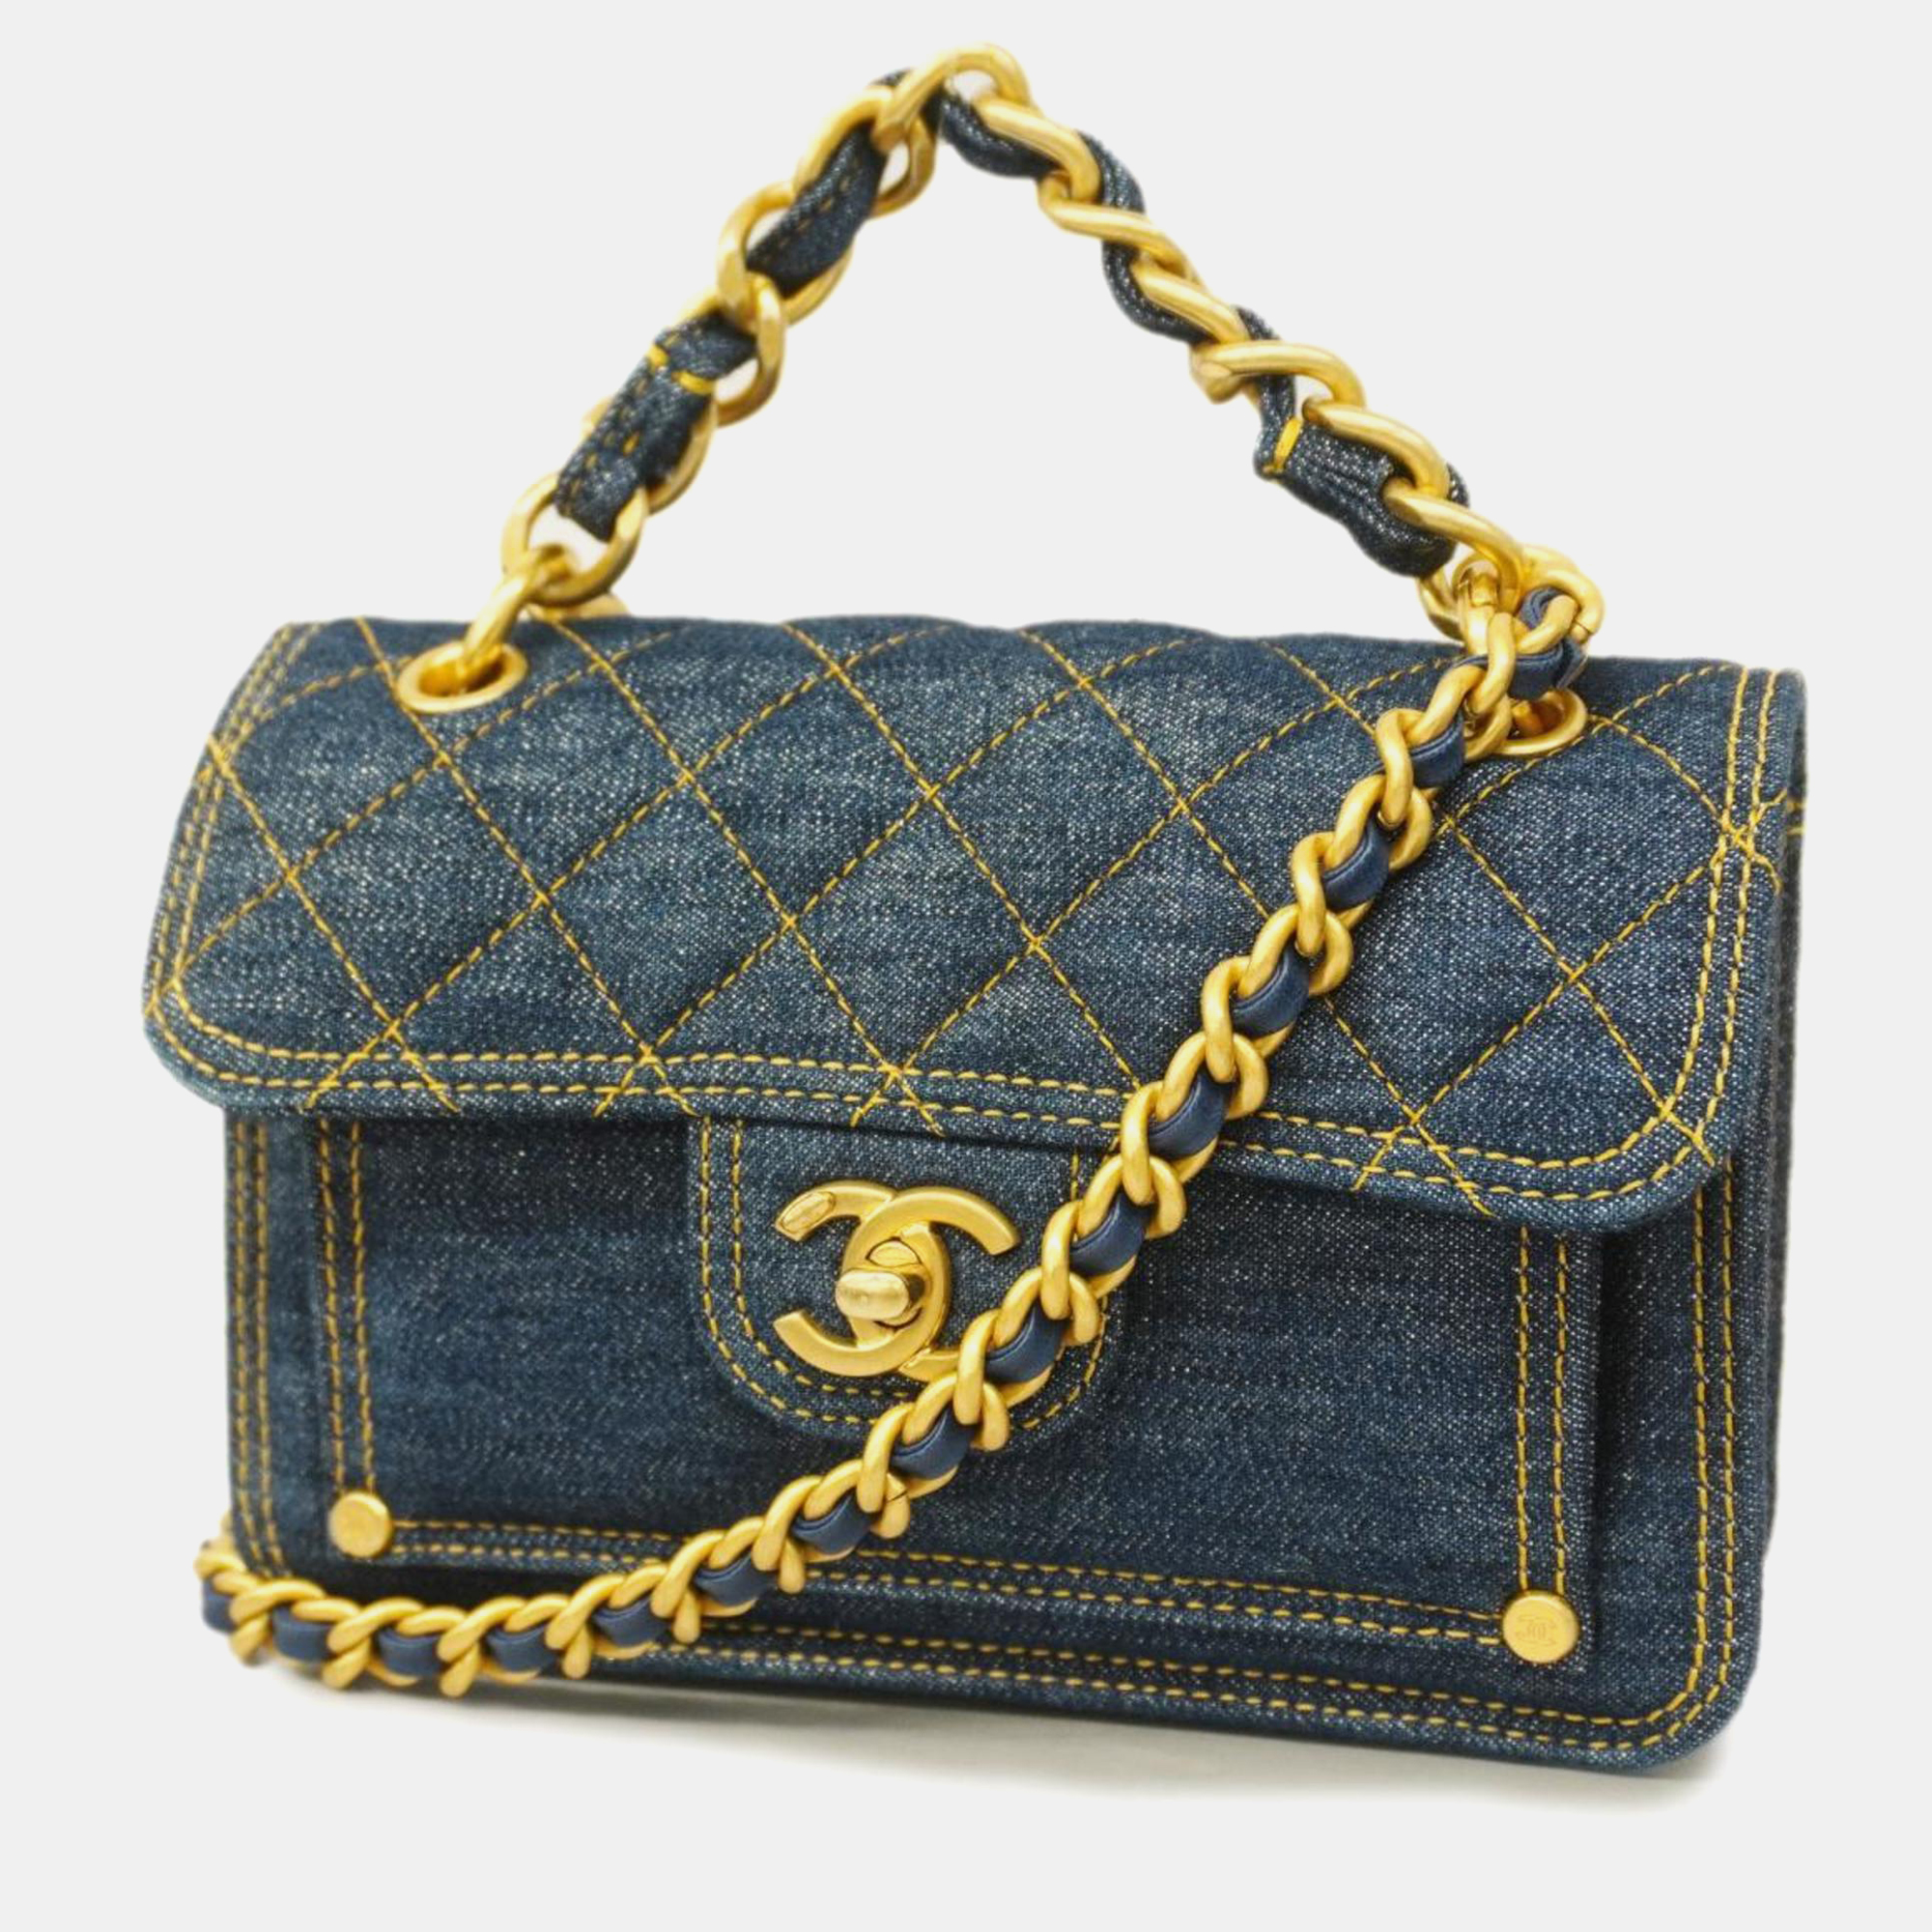 Chanel denim quilted double you mini flap bag